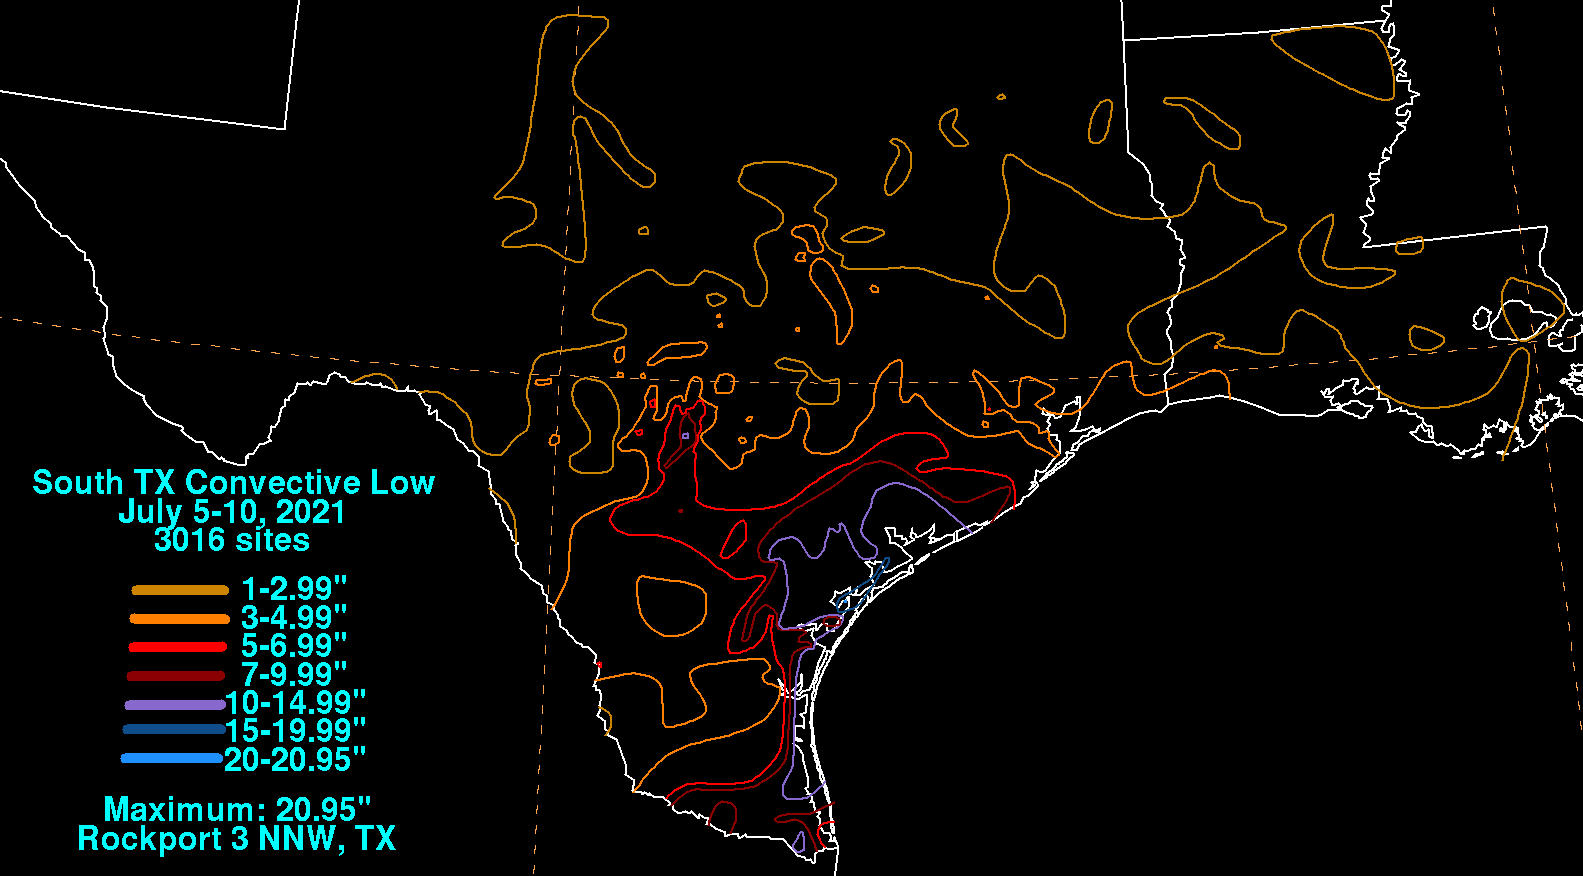 South Texas Convective Low (2021) Rainfall